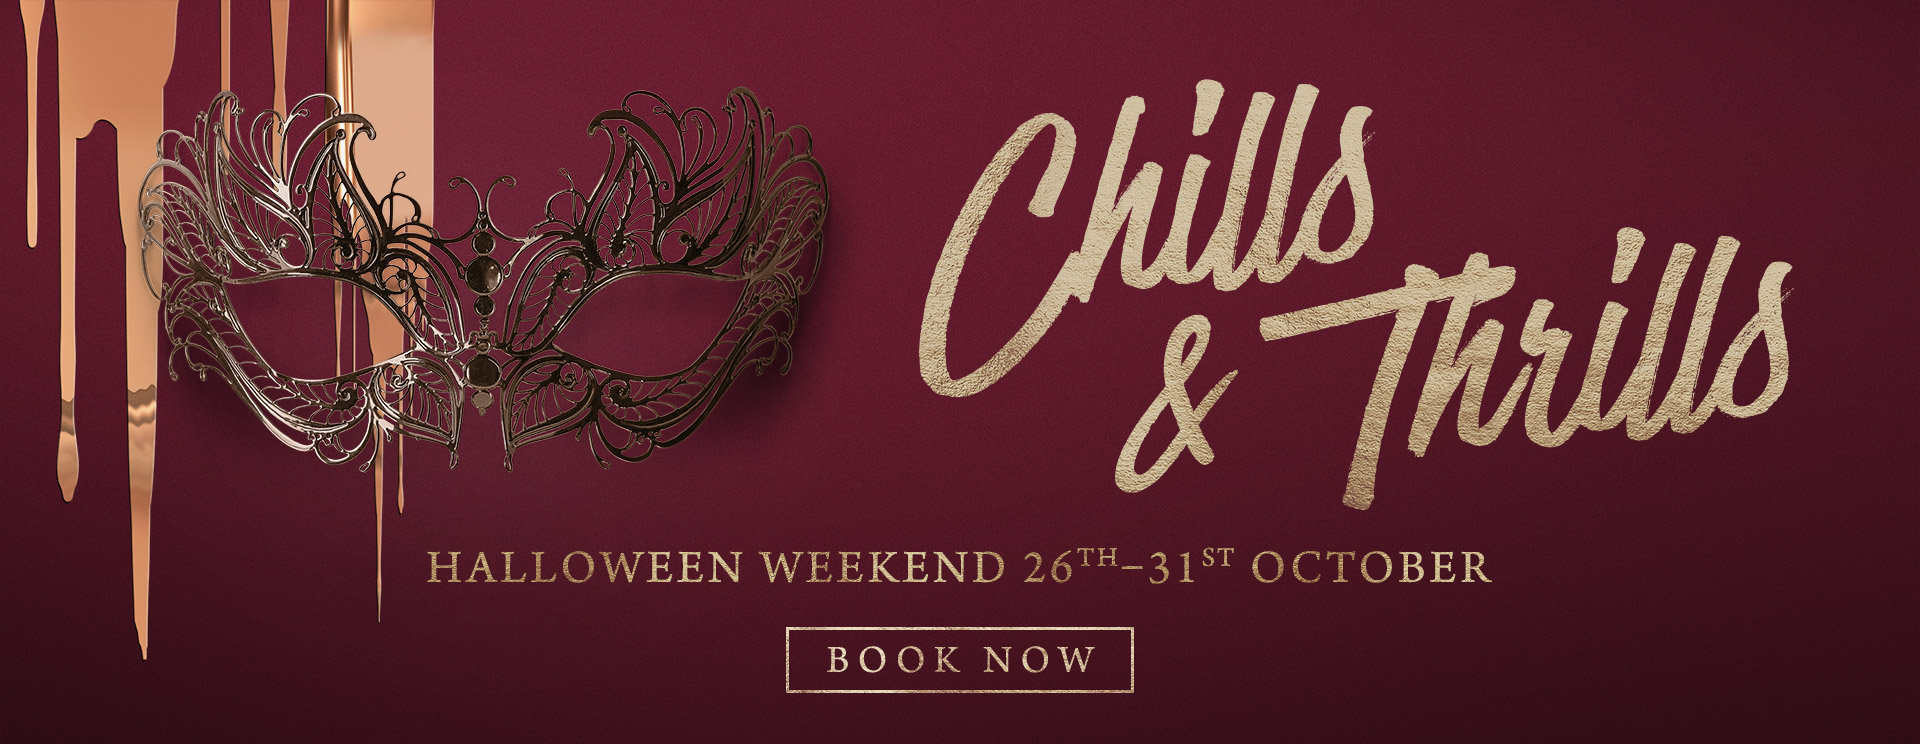 Chills & Thrills this Halloween at The Flying Horse